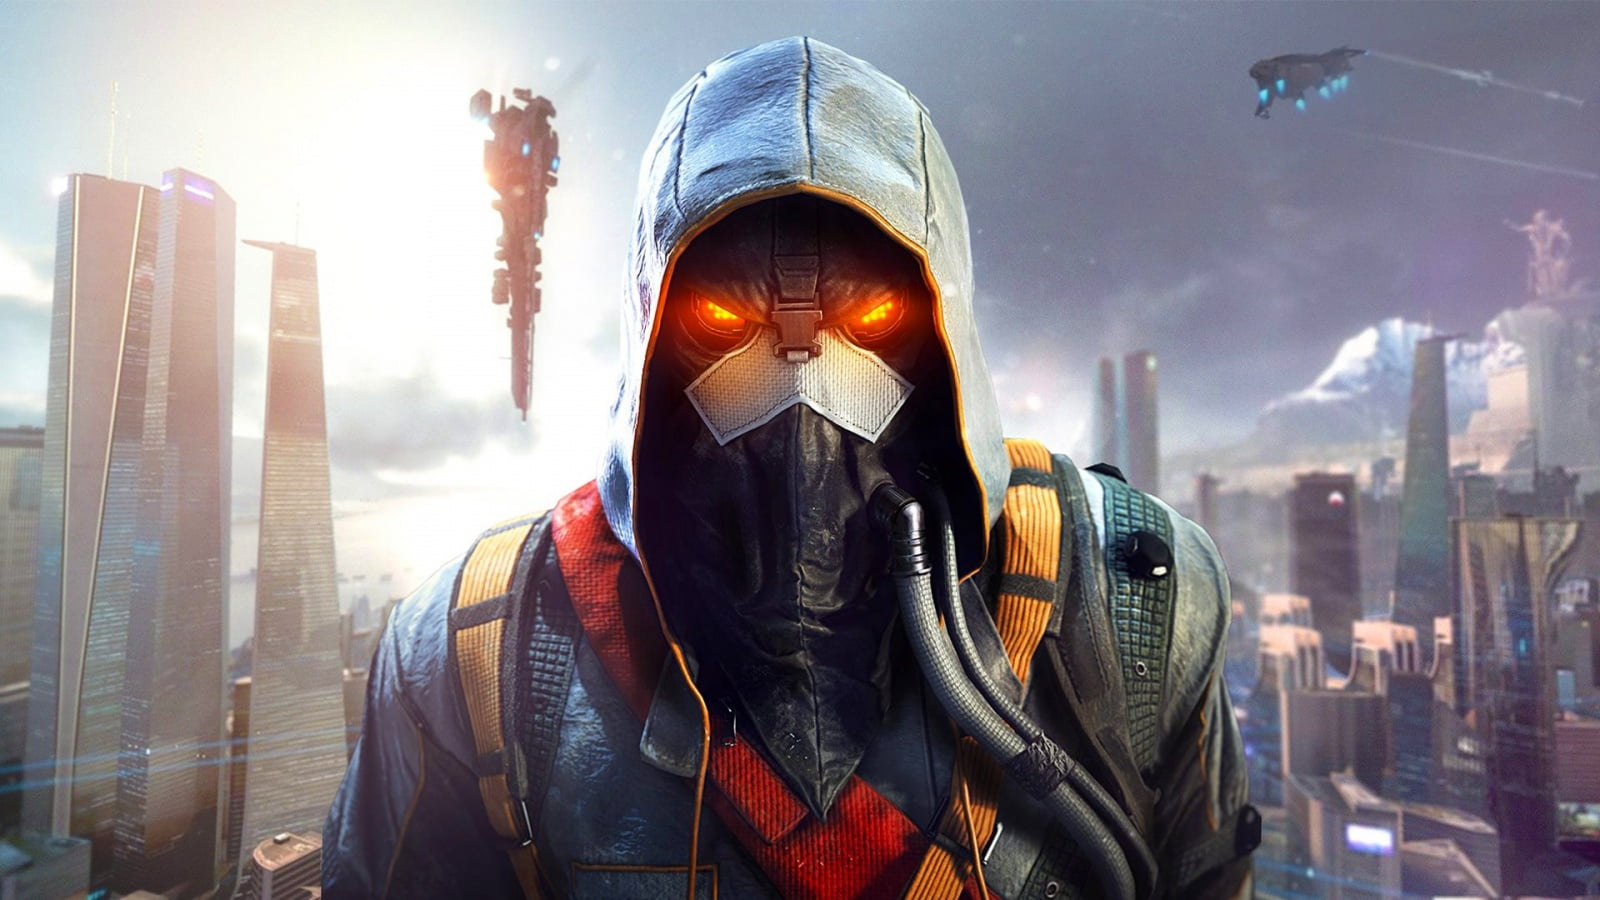 download killzone shadow fall pc for free